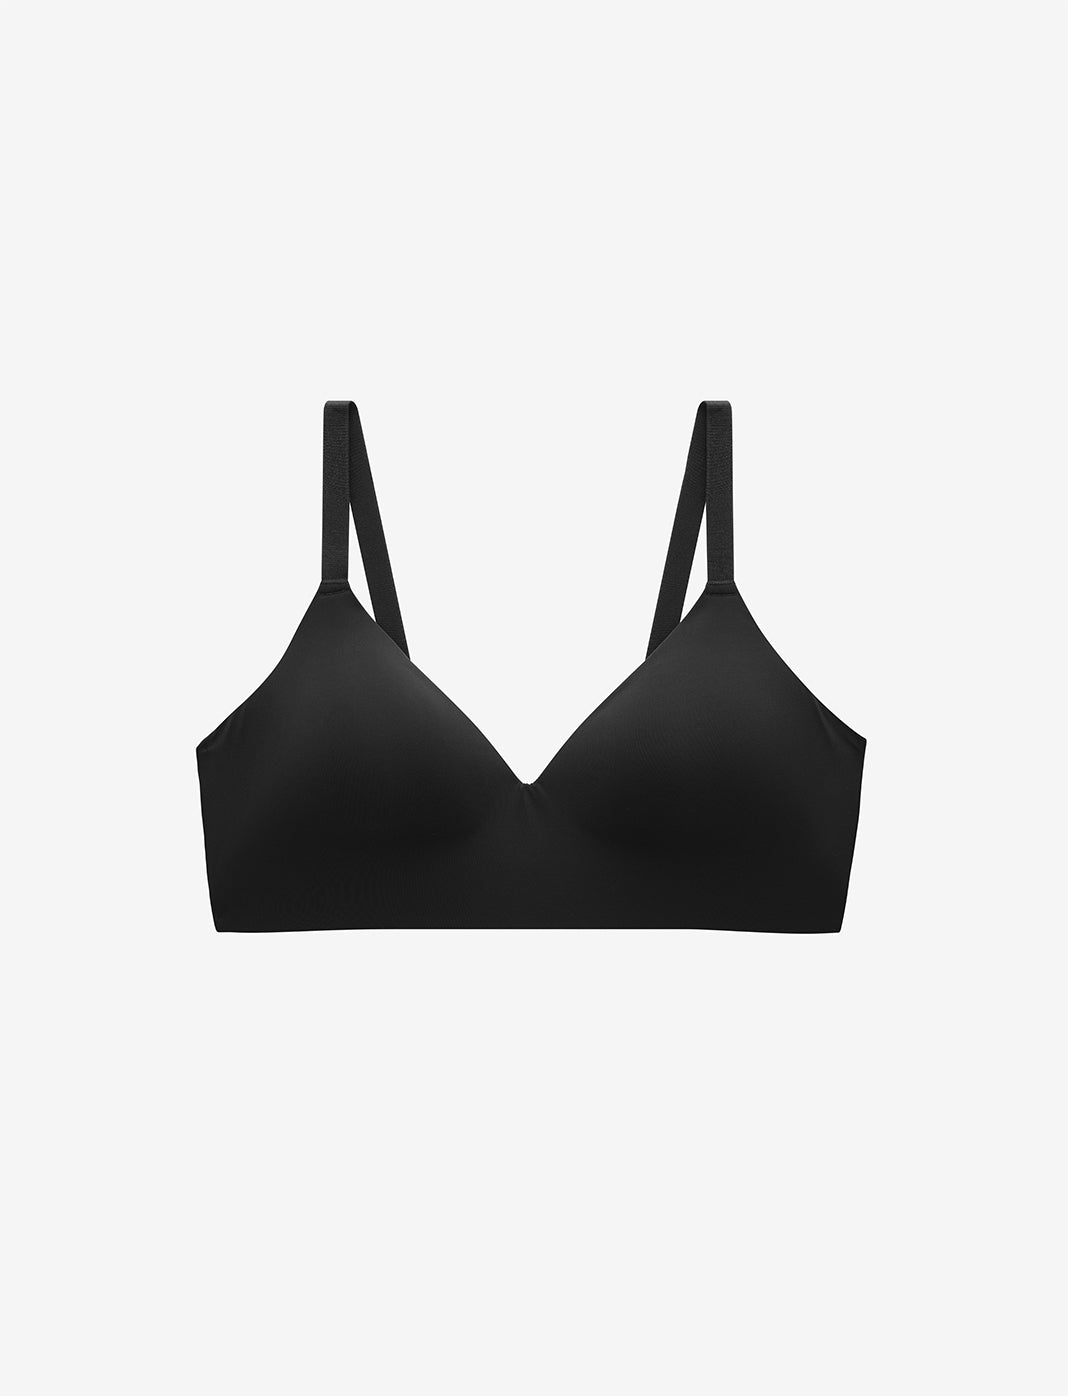 CLZOUD Lively Bras for Women Black Sports Bra for Women No Wire